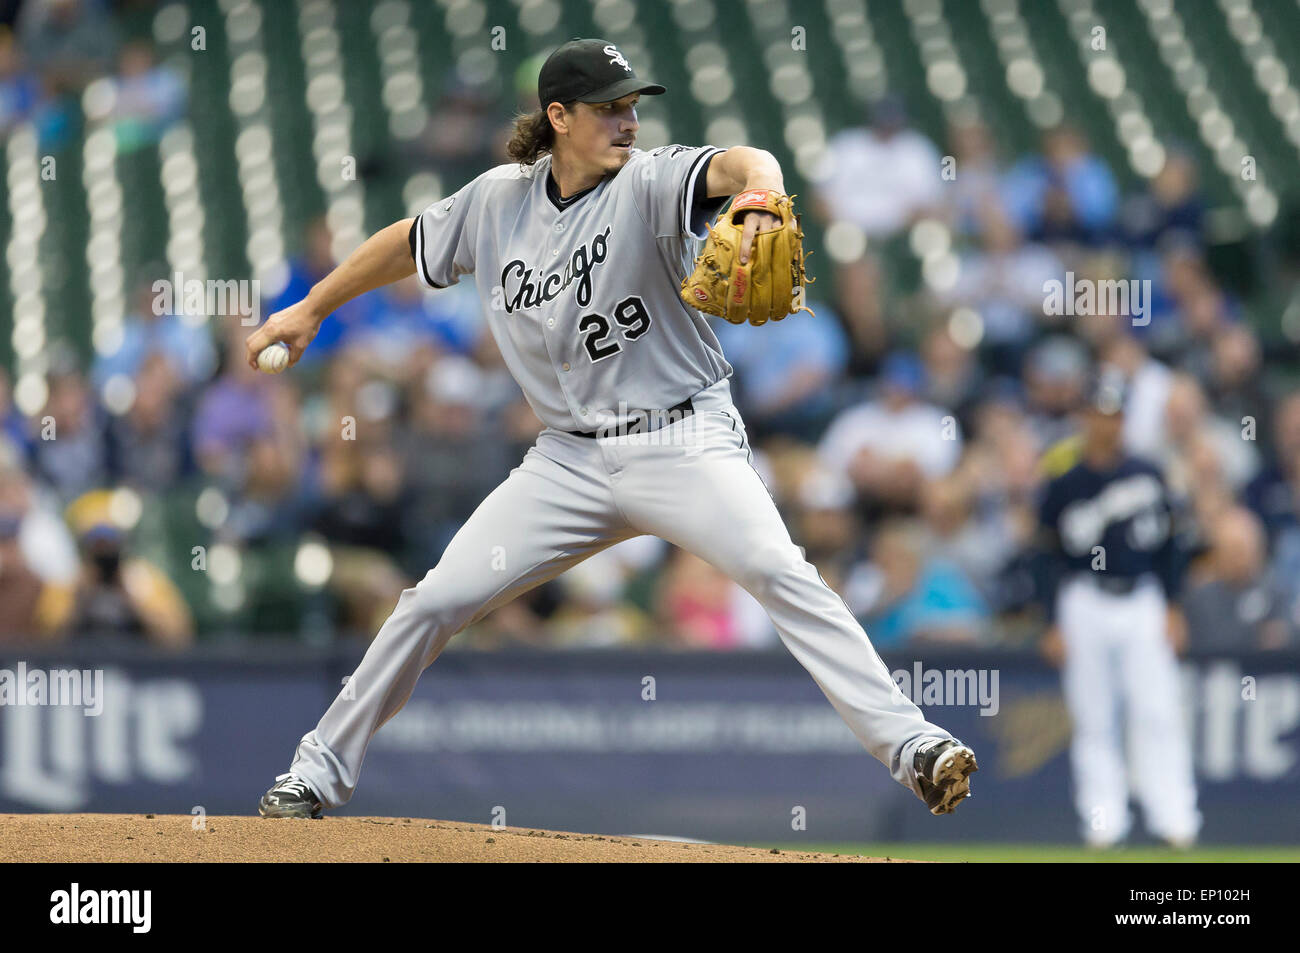 Milwaukee, WI, USA. 11th May, 2015. Chicago White Sox starting pitcher Jeff Samardzija #29 delivers a pitch in the Major League Baseball game between the Milwaukee Brewers and the Chicago White Sox at Miller Park in Milwaukee, WI. Brewers defeated the Sox 10-7. John Fisher/CSM/Alamy Live News Stock Photo